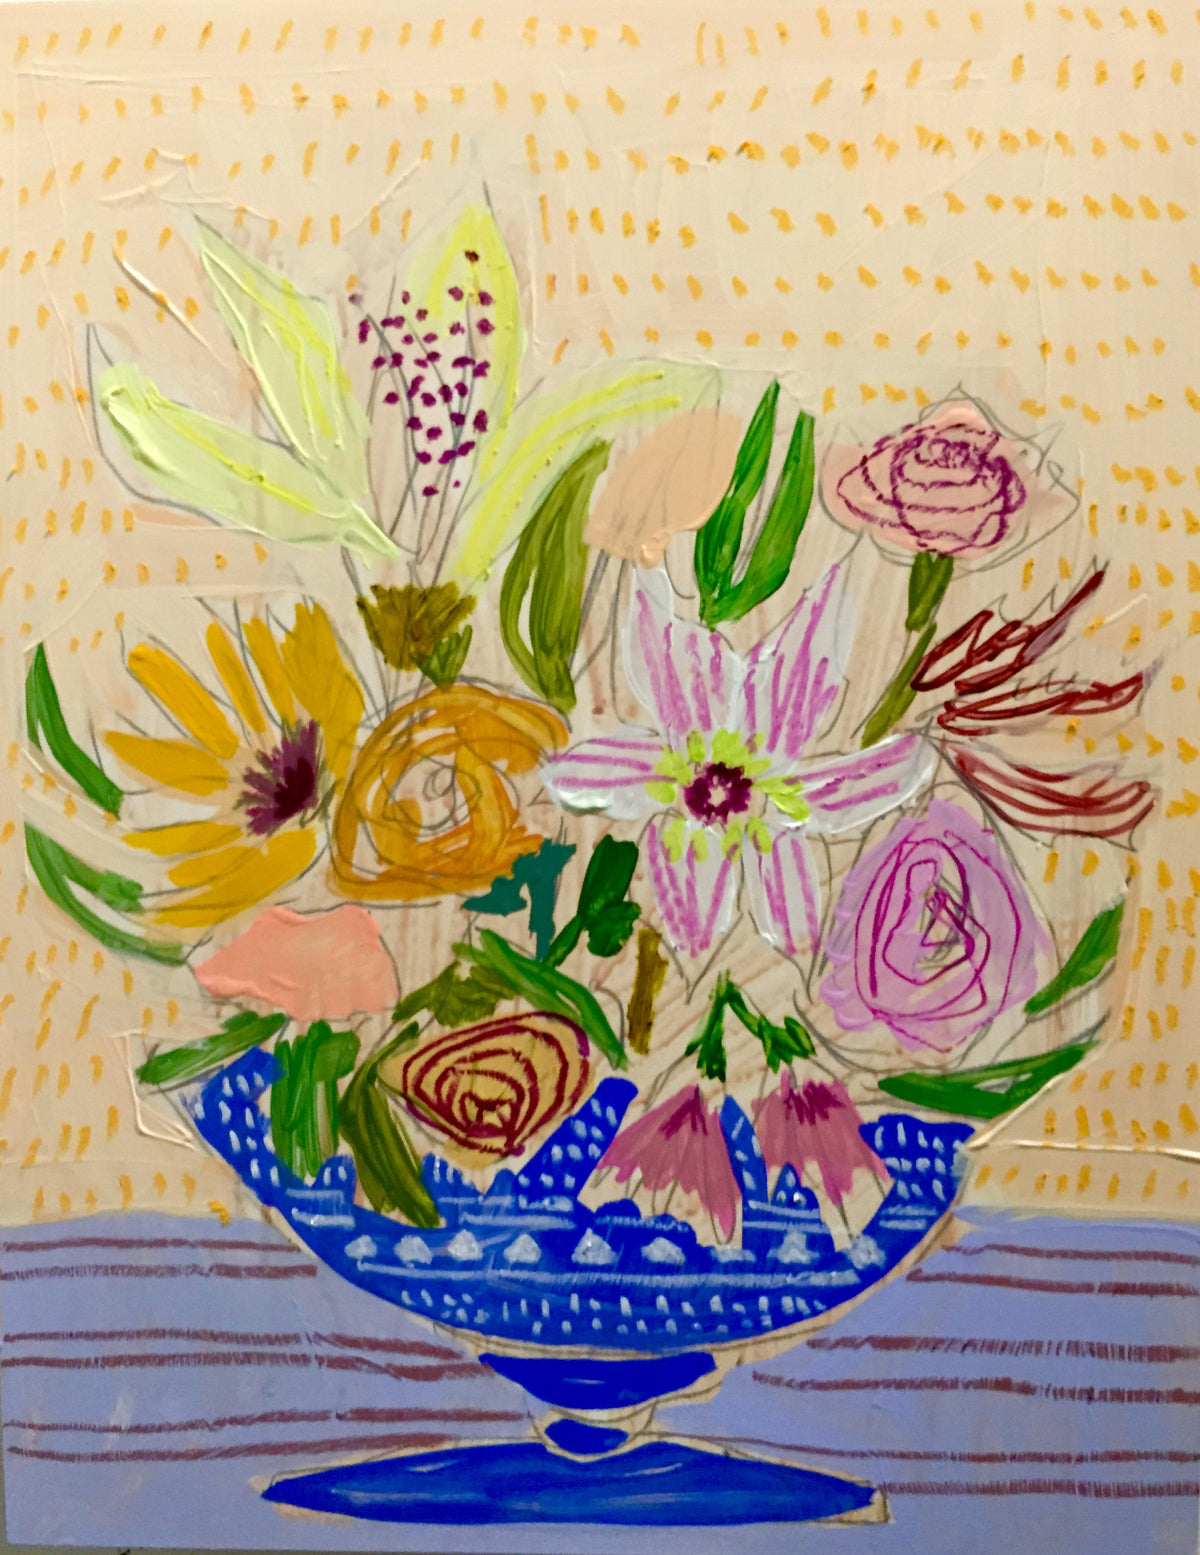 FLOWERS FOR MOLLY - 11X14